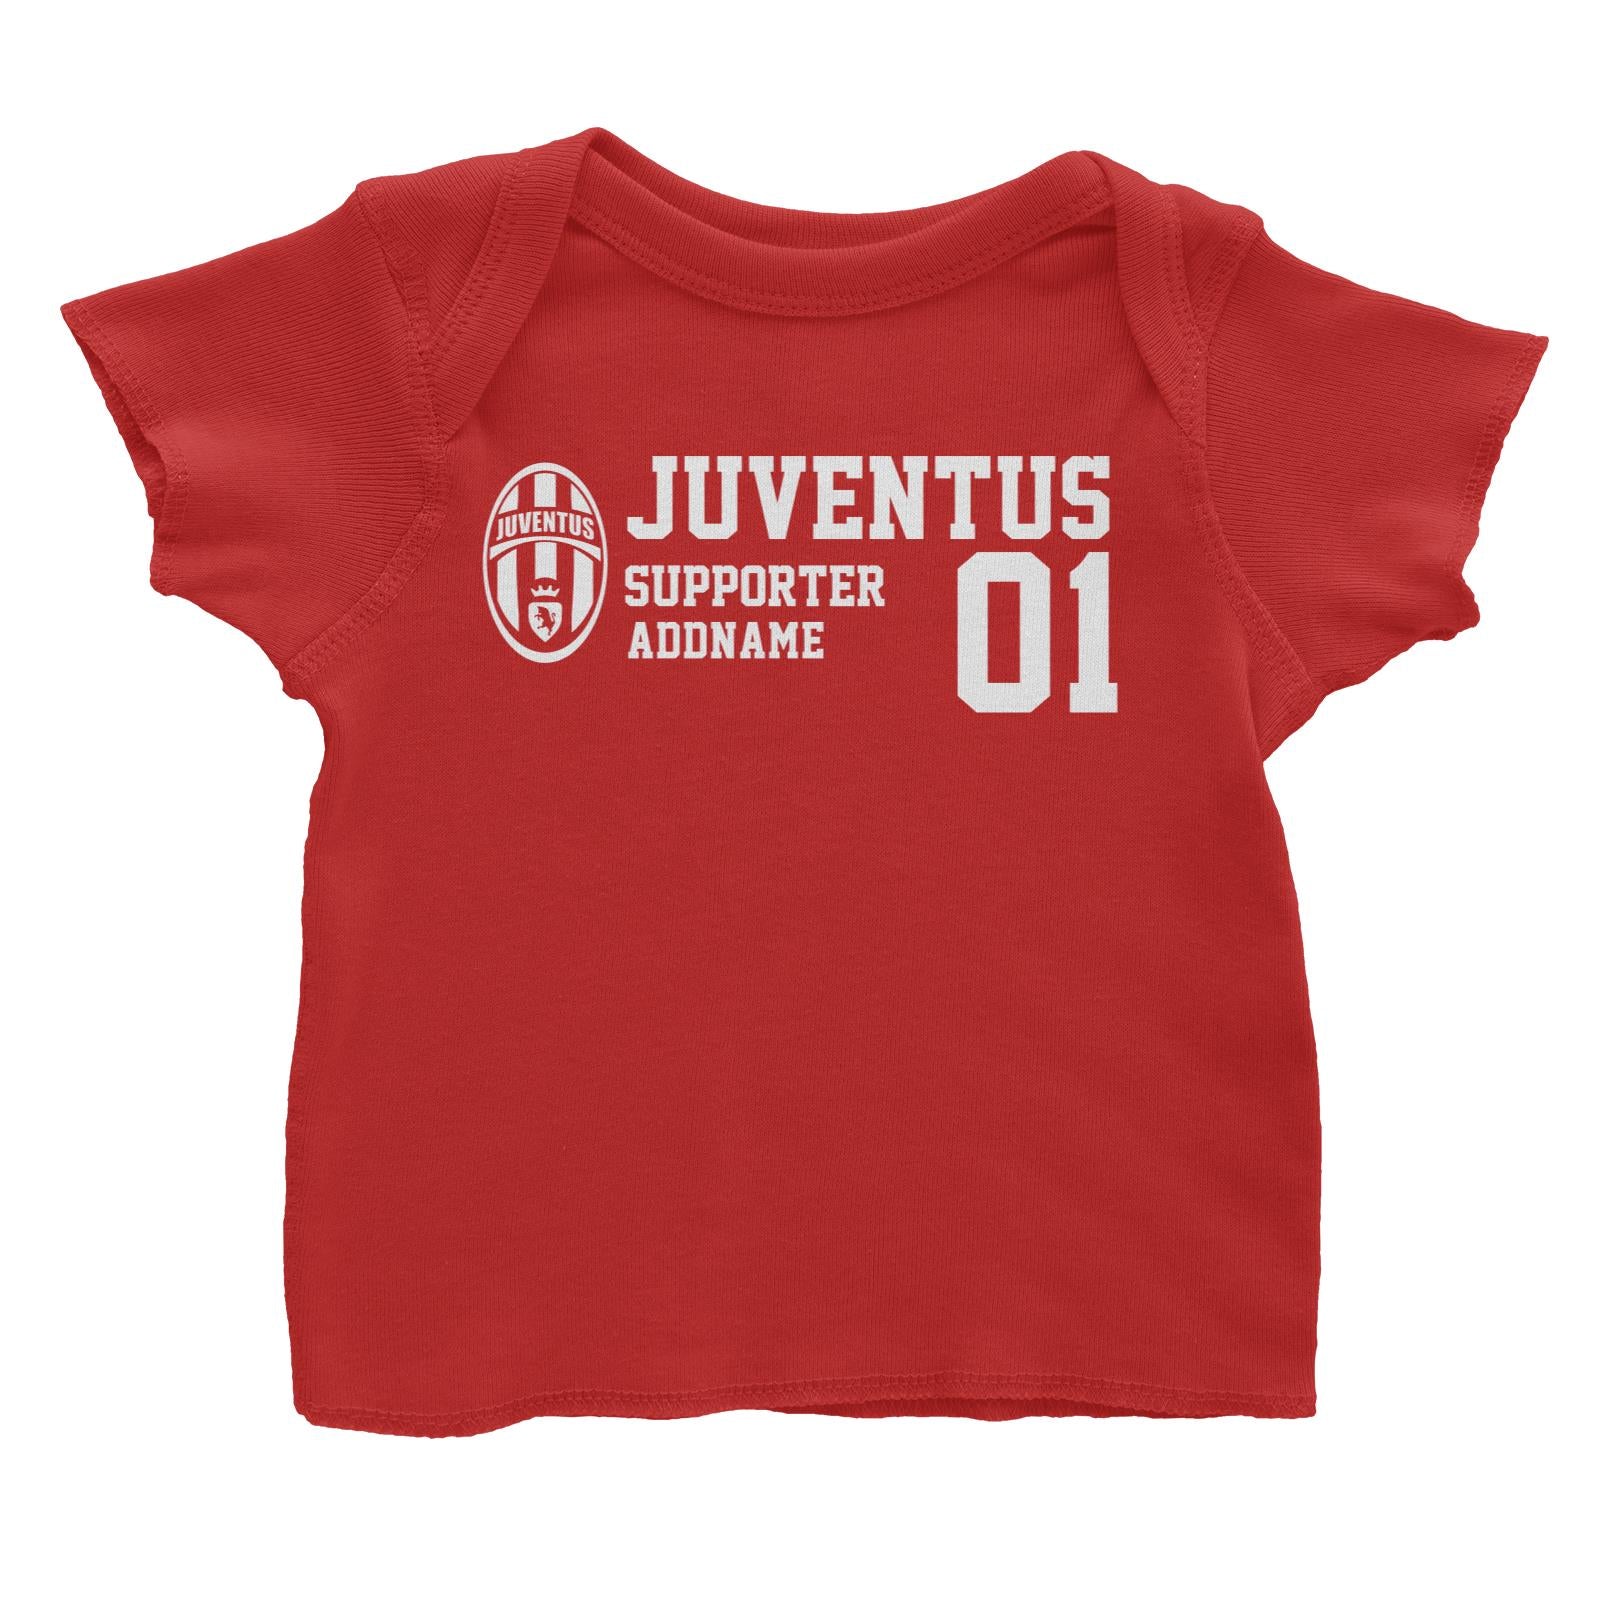 Juventus Football Supporter Addname Baby T-Shirt